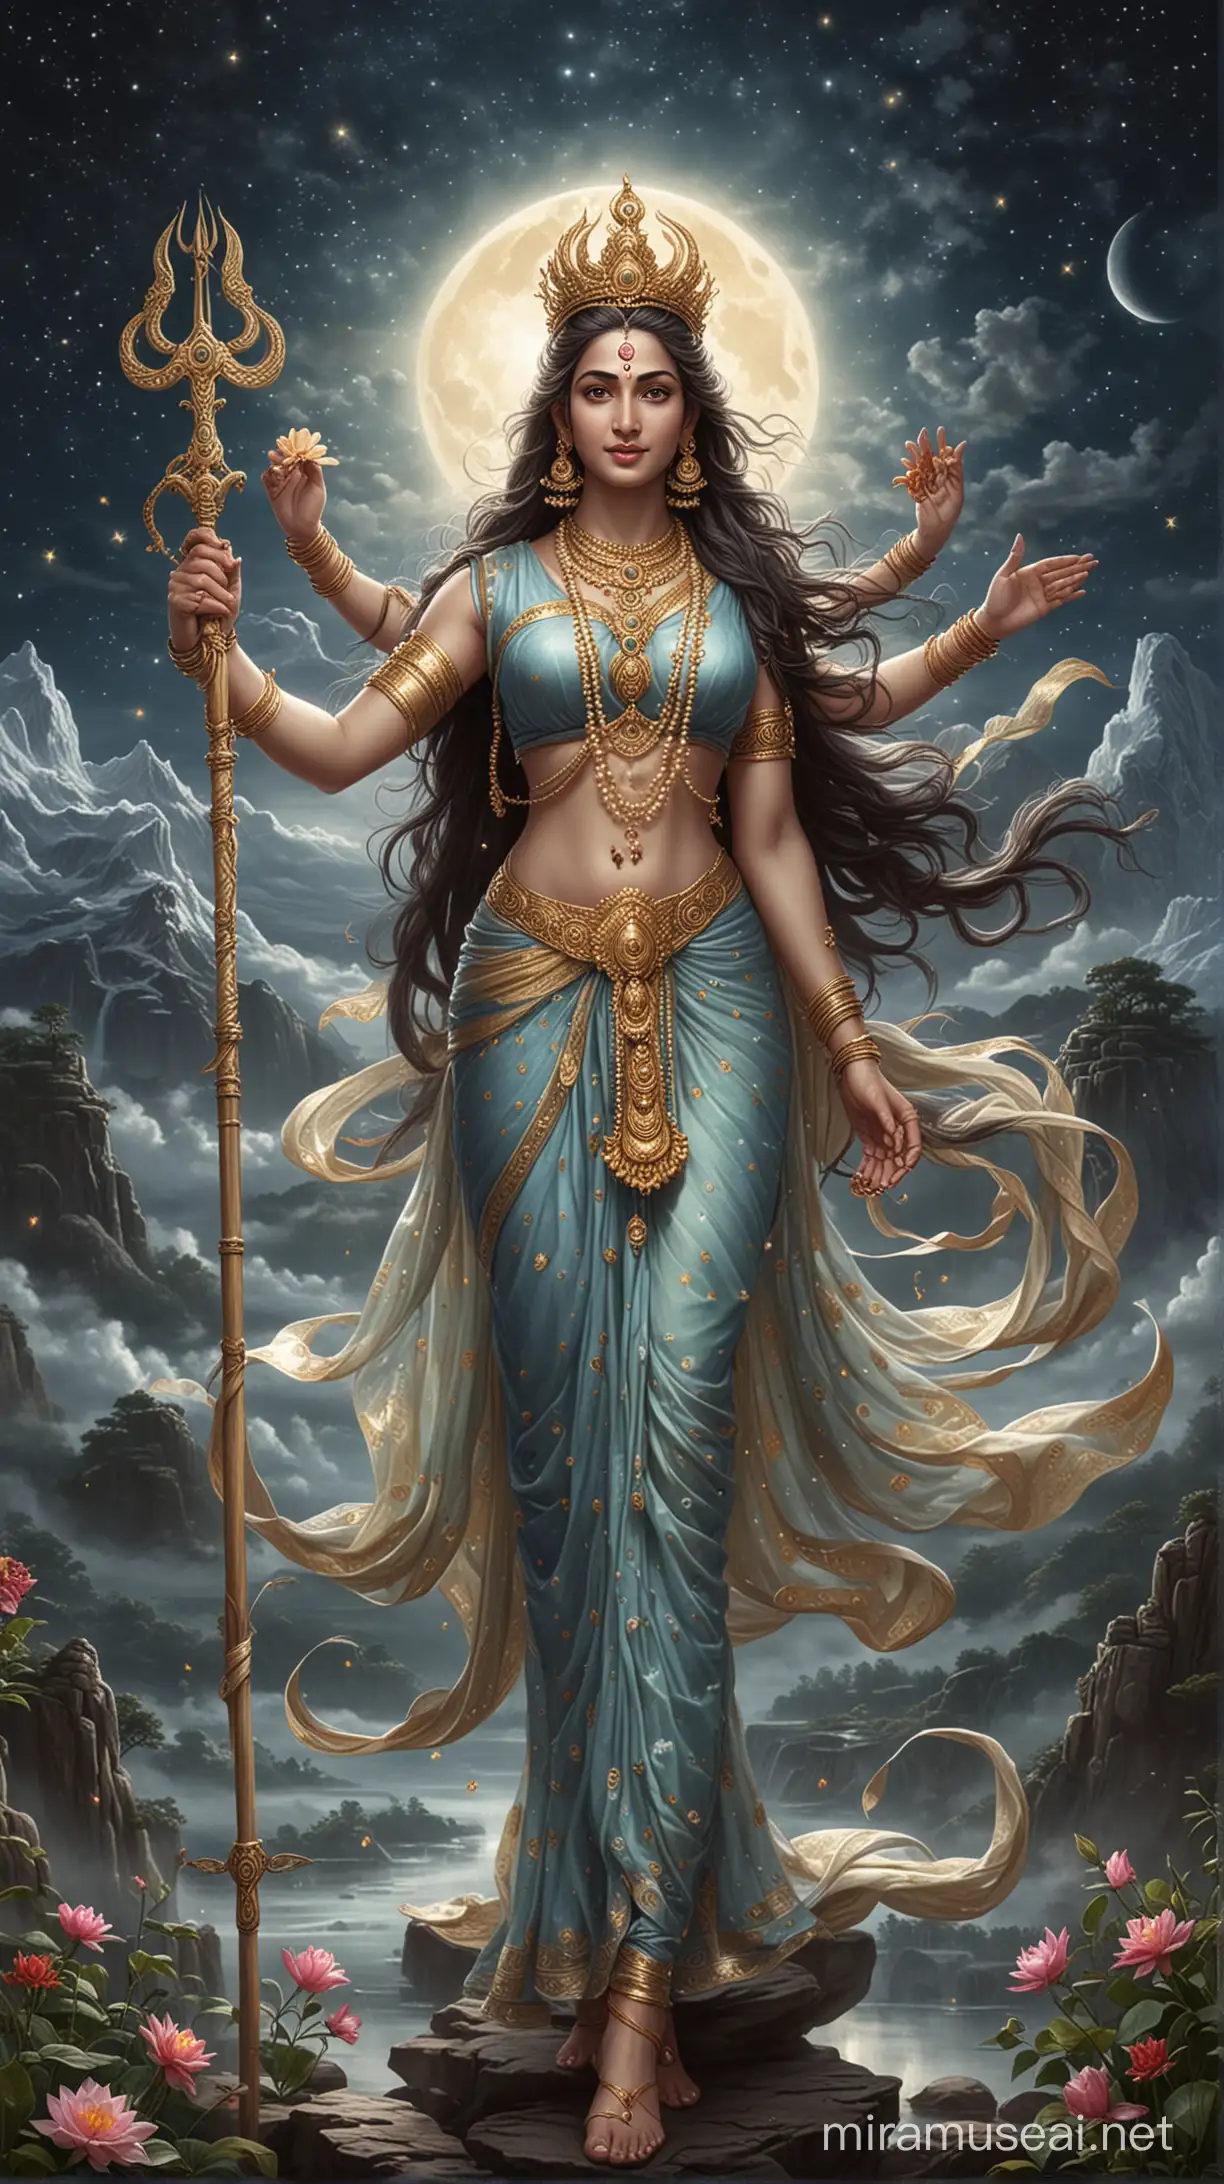 A high-quality, mesmerizing illustration of Lord Shiva and Goddess Parvati, set against a serene, celestial backdrop. Shiva is depicted in his classic form, adorned with a third eye, serpent garlands, and a crescent moon on his head. He holds a trident in one hand and a damru in the other, exuding an aura of peace and power. Parvati, by his side, is beautifully adorned with an assortment of jewelry and a crown, emanating grace and elegance. Their surroundings are an otherworldly landscape, with floating lotus flowers, celestial bodies, and a gentle halo of light.